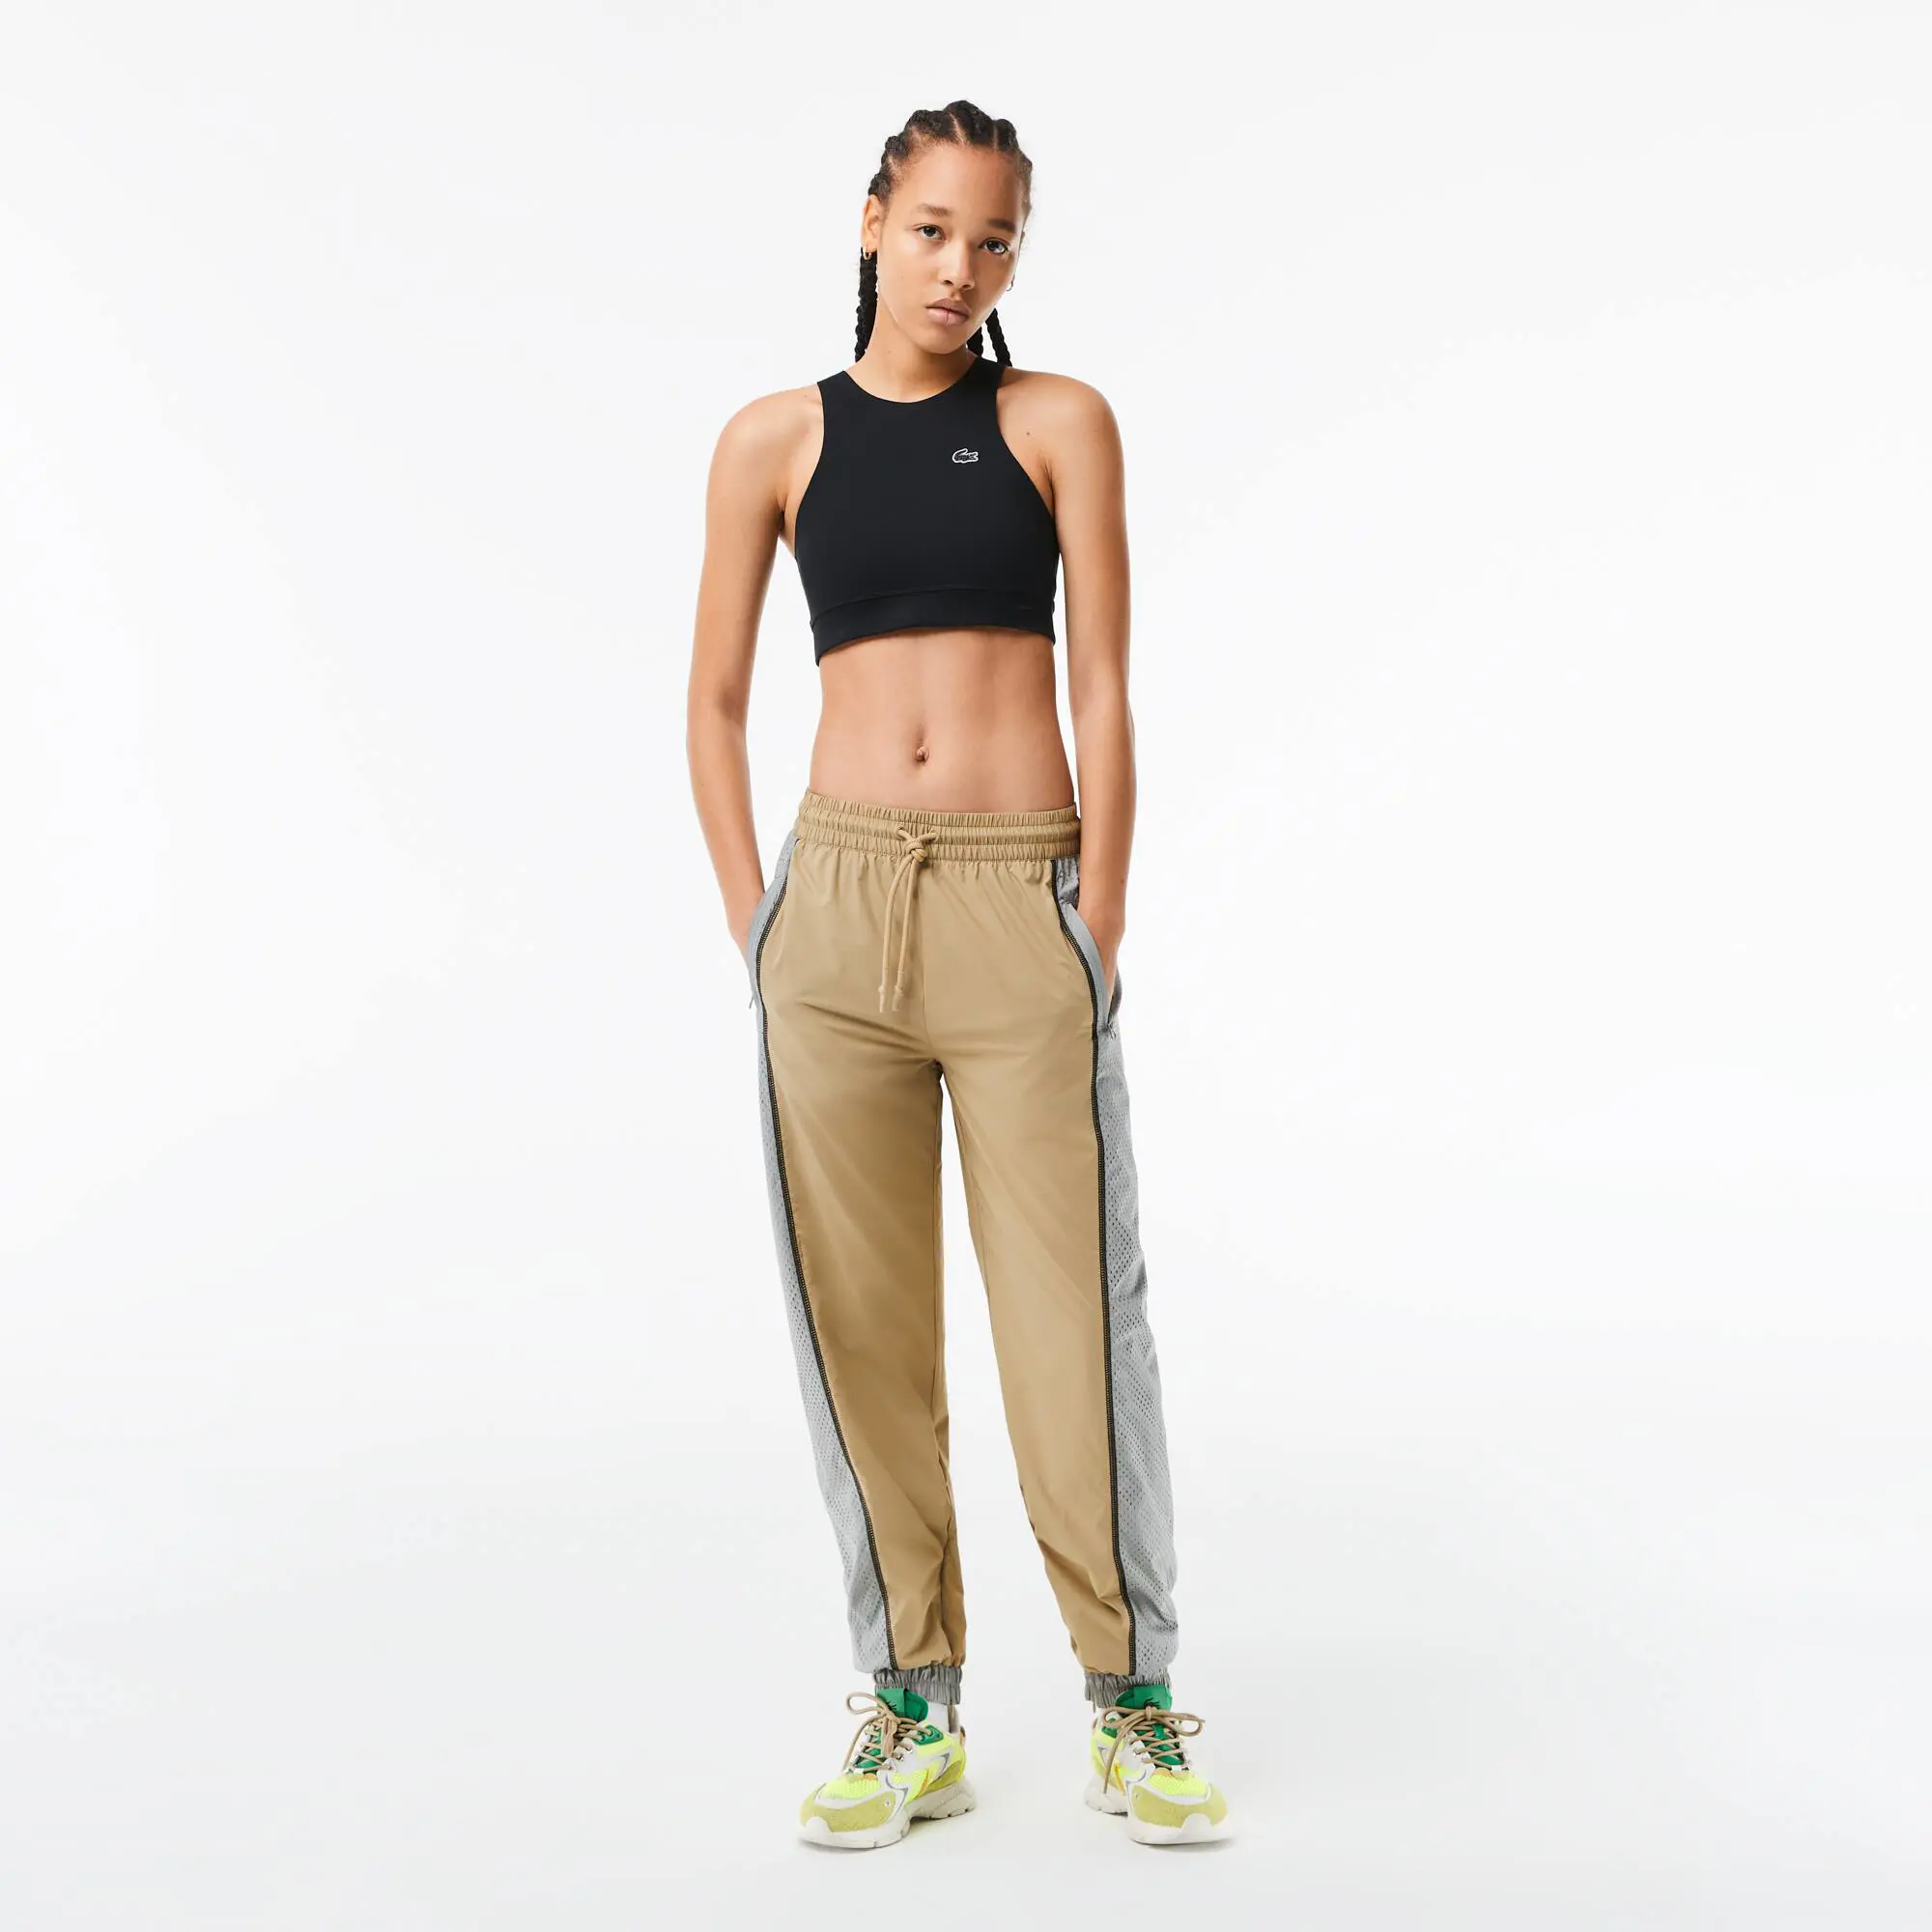 Lacoste Women’s Perforated Effect Joggers. 1